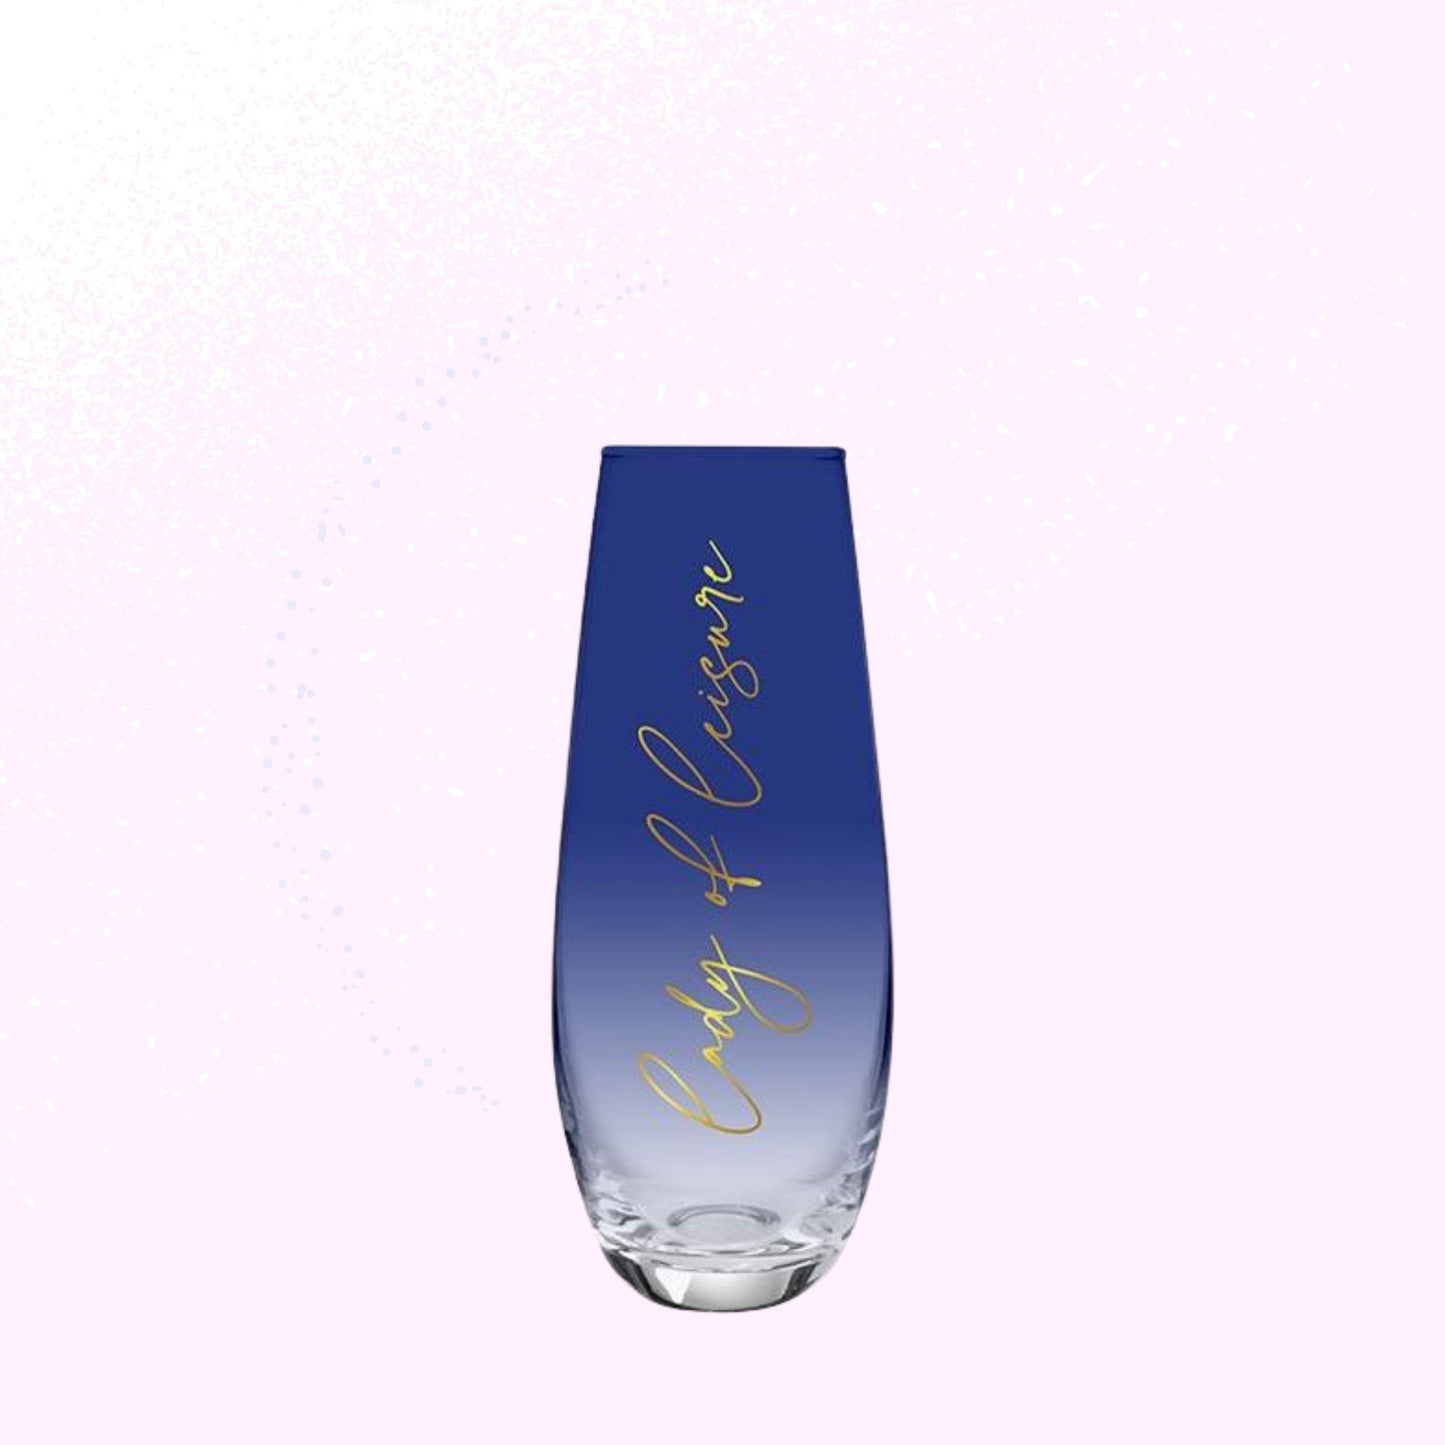 Lady of Leisure Stemless Flute Champagne Glass in Dark Blue Tinted Glass and Gold | 11.8 oz.